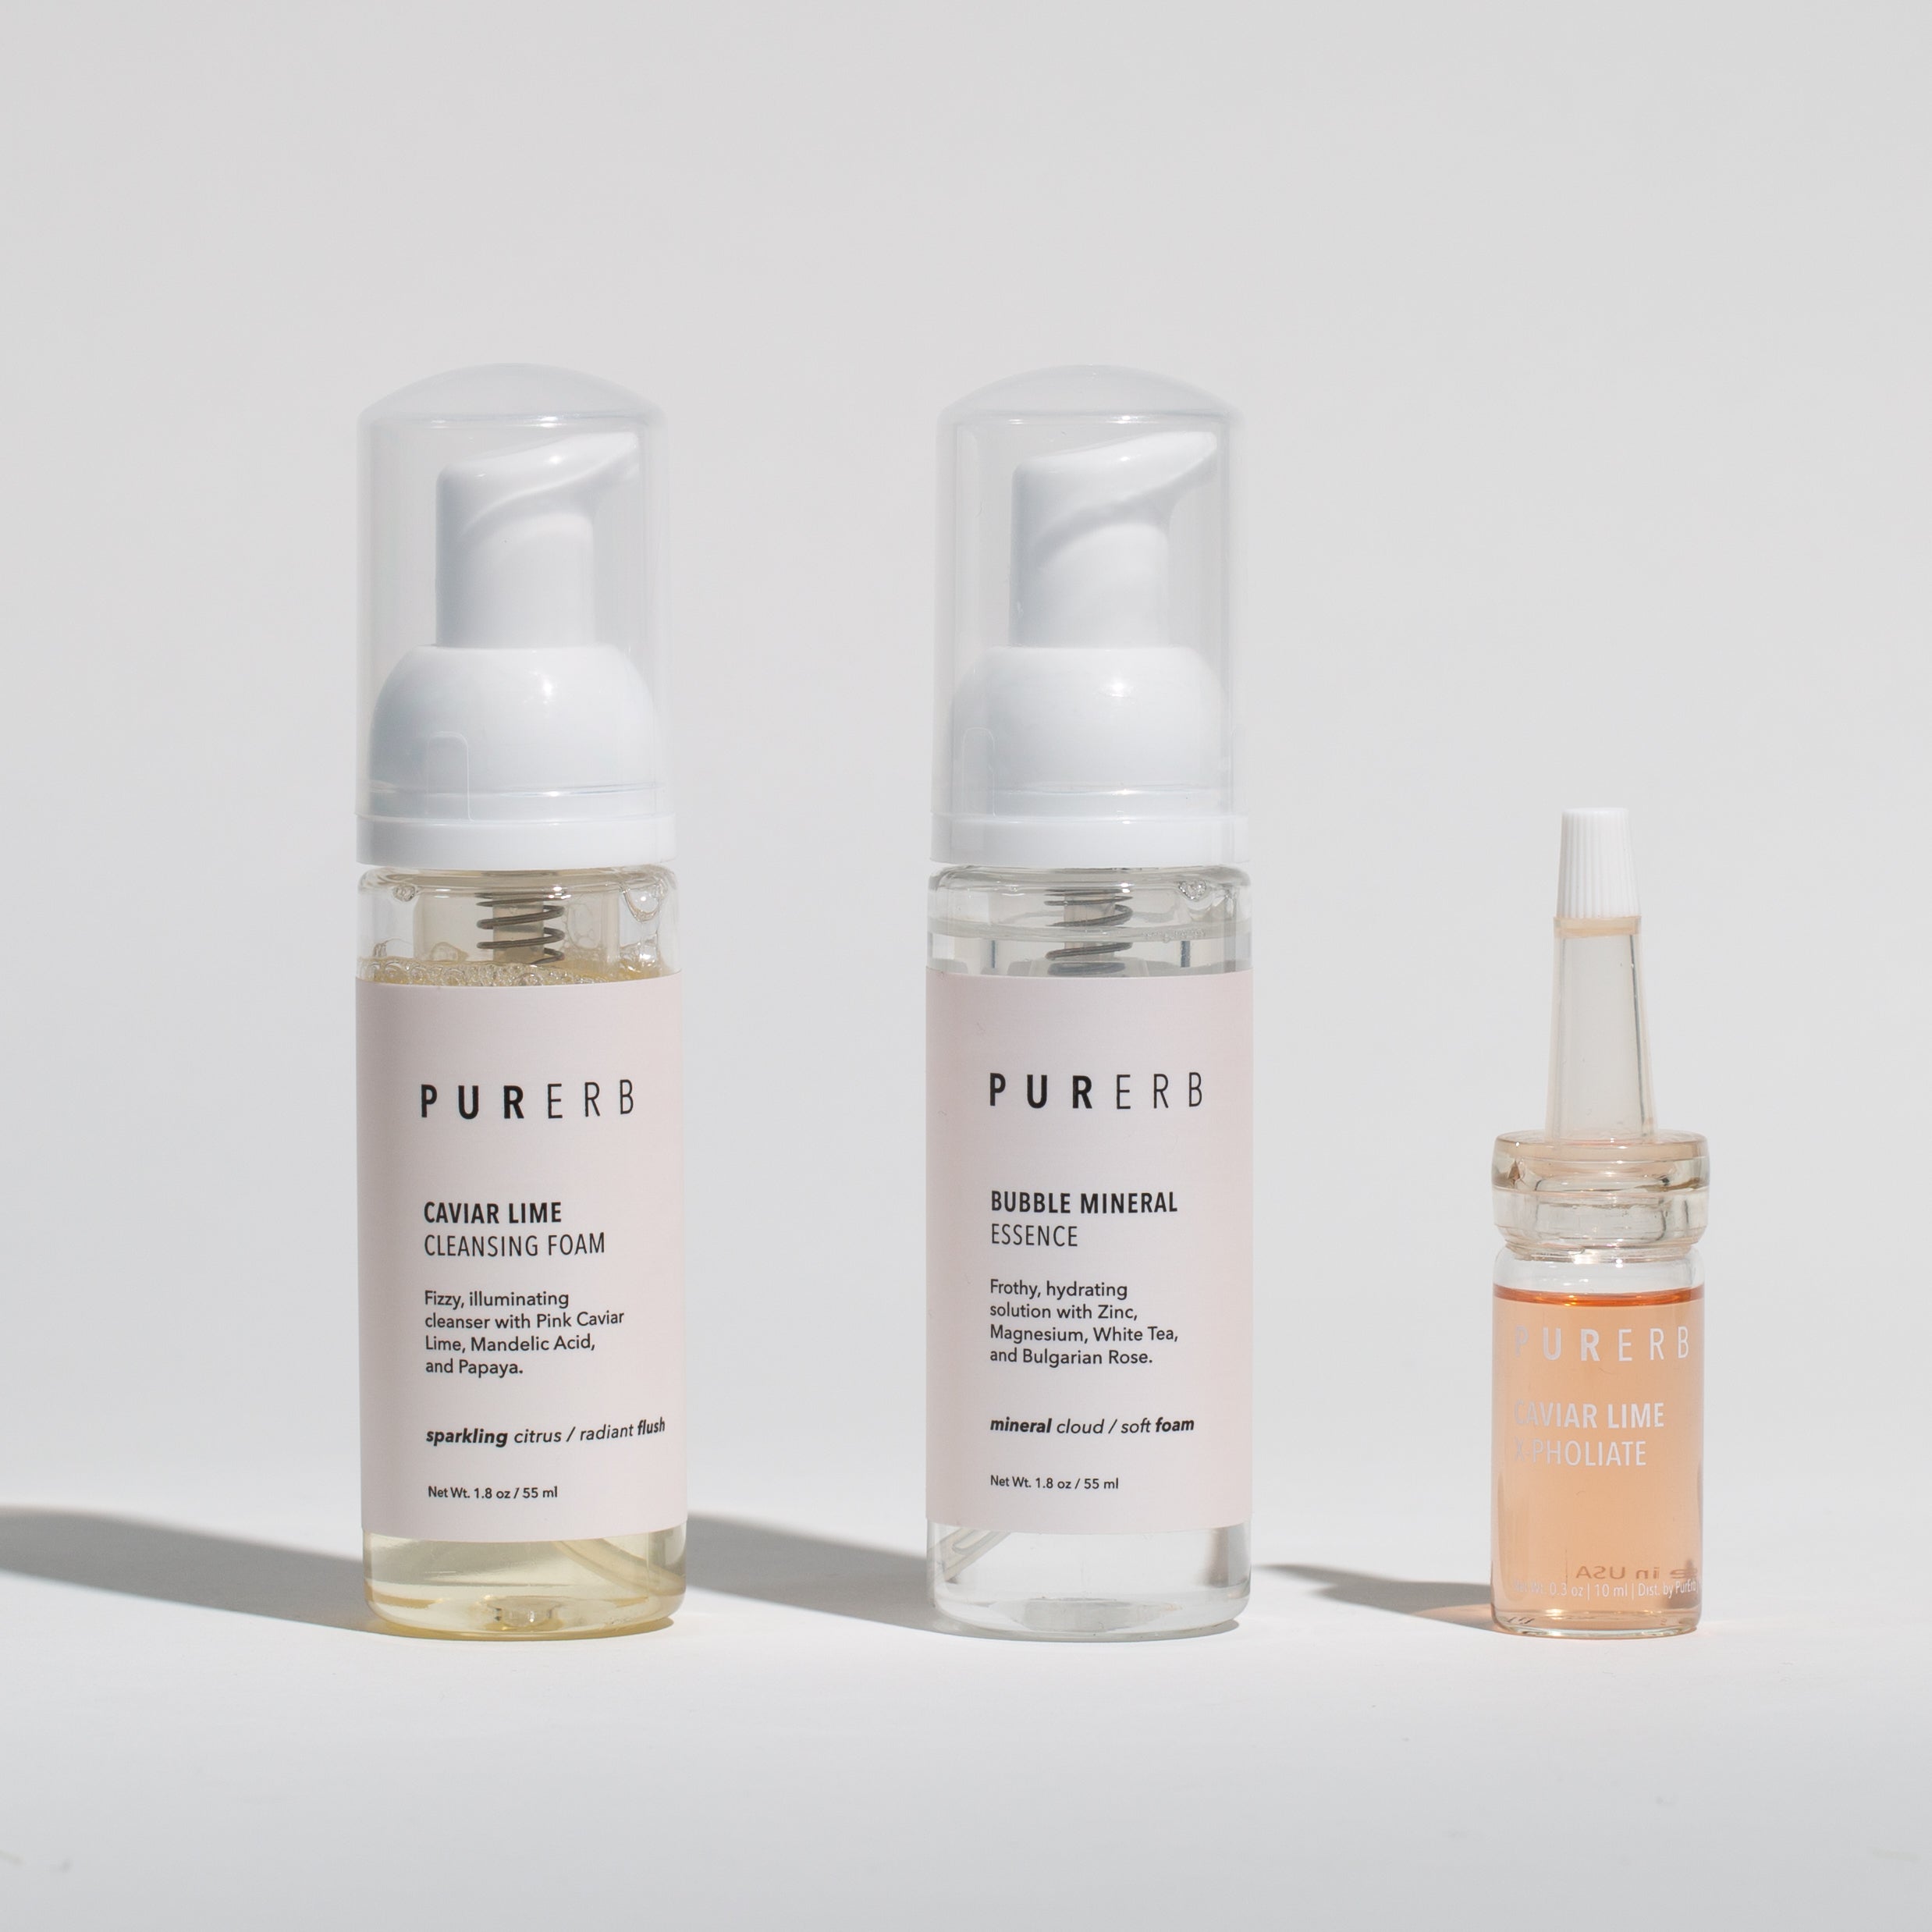 Glow-Getter Exfoliating Trio: Banish Oil and Dullness. Perfect for Oily, Combination Skin. Targets Dullness, Redness, Pores, Uneven Tone, and Texture.